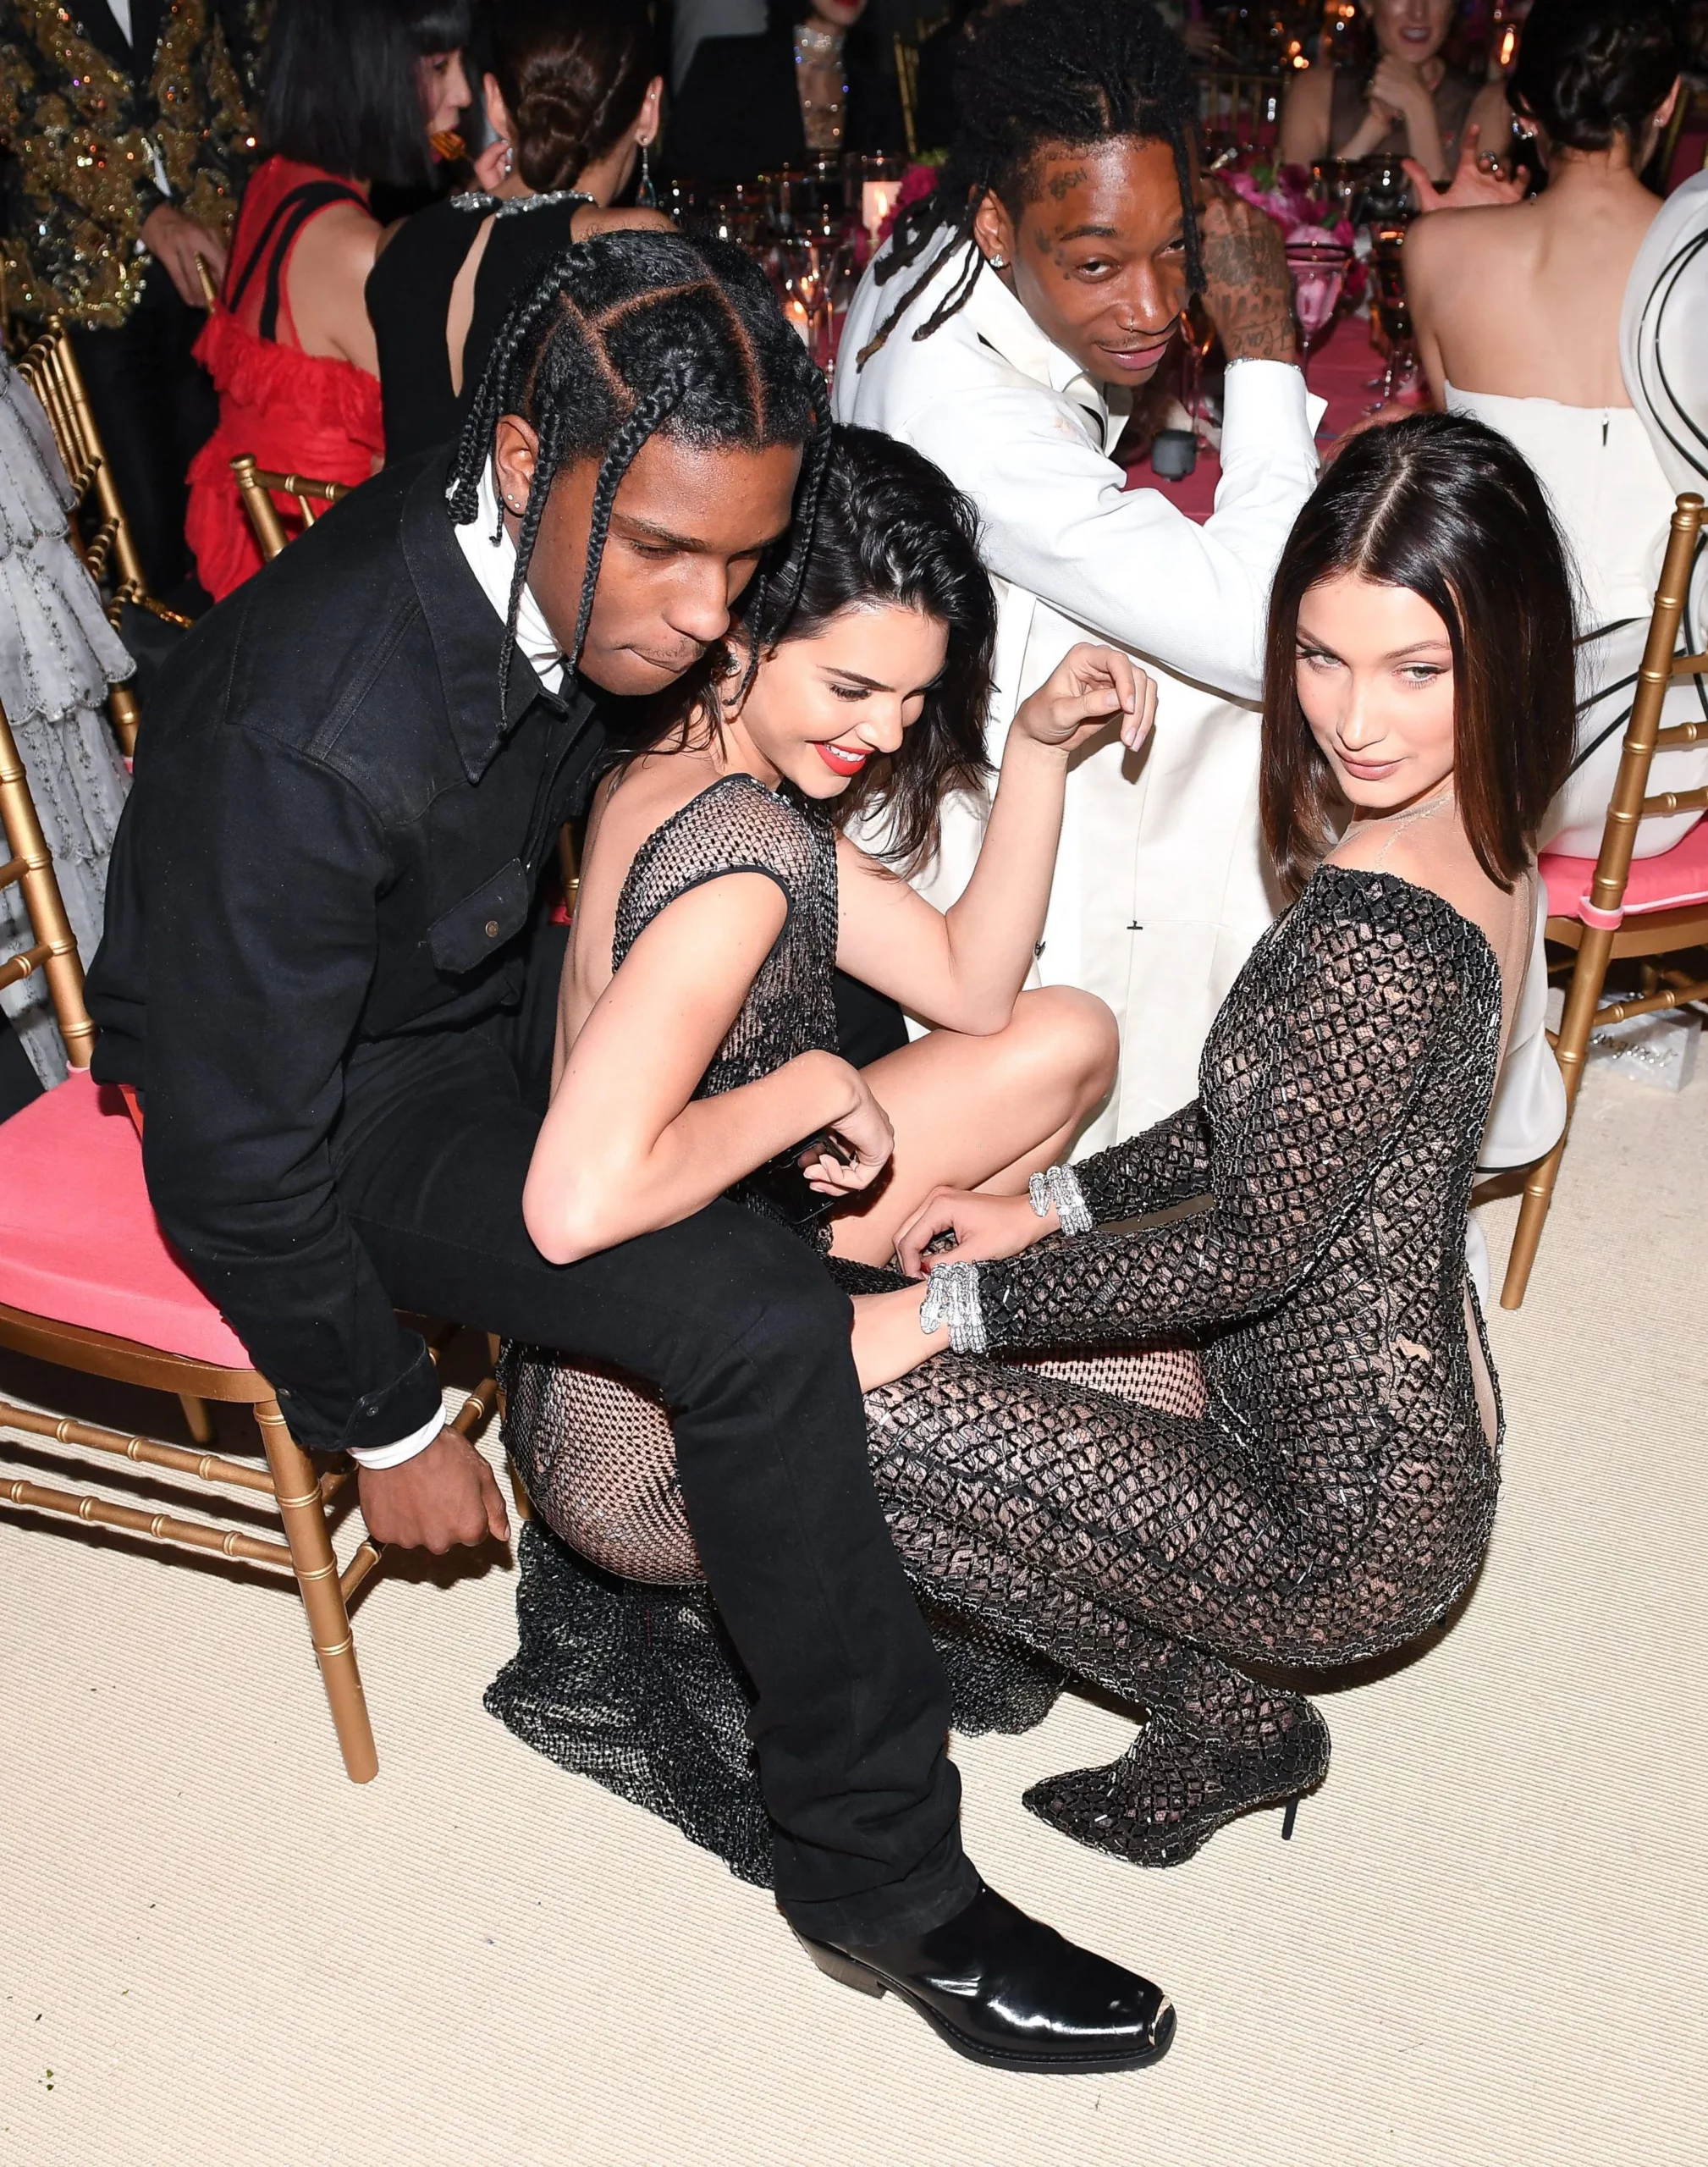 Kendall Jenner and A$AP Rocky at the Met Gala